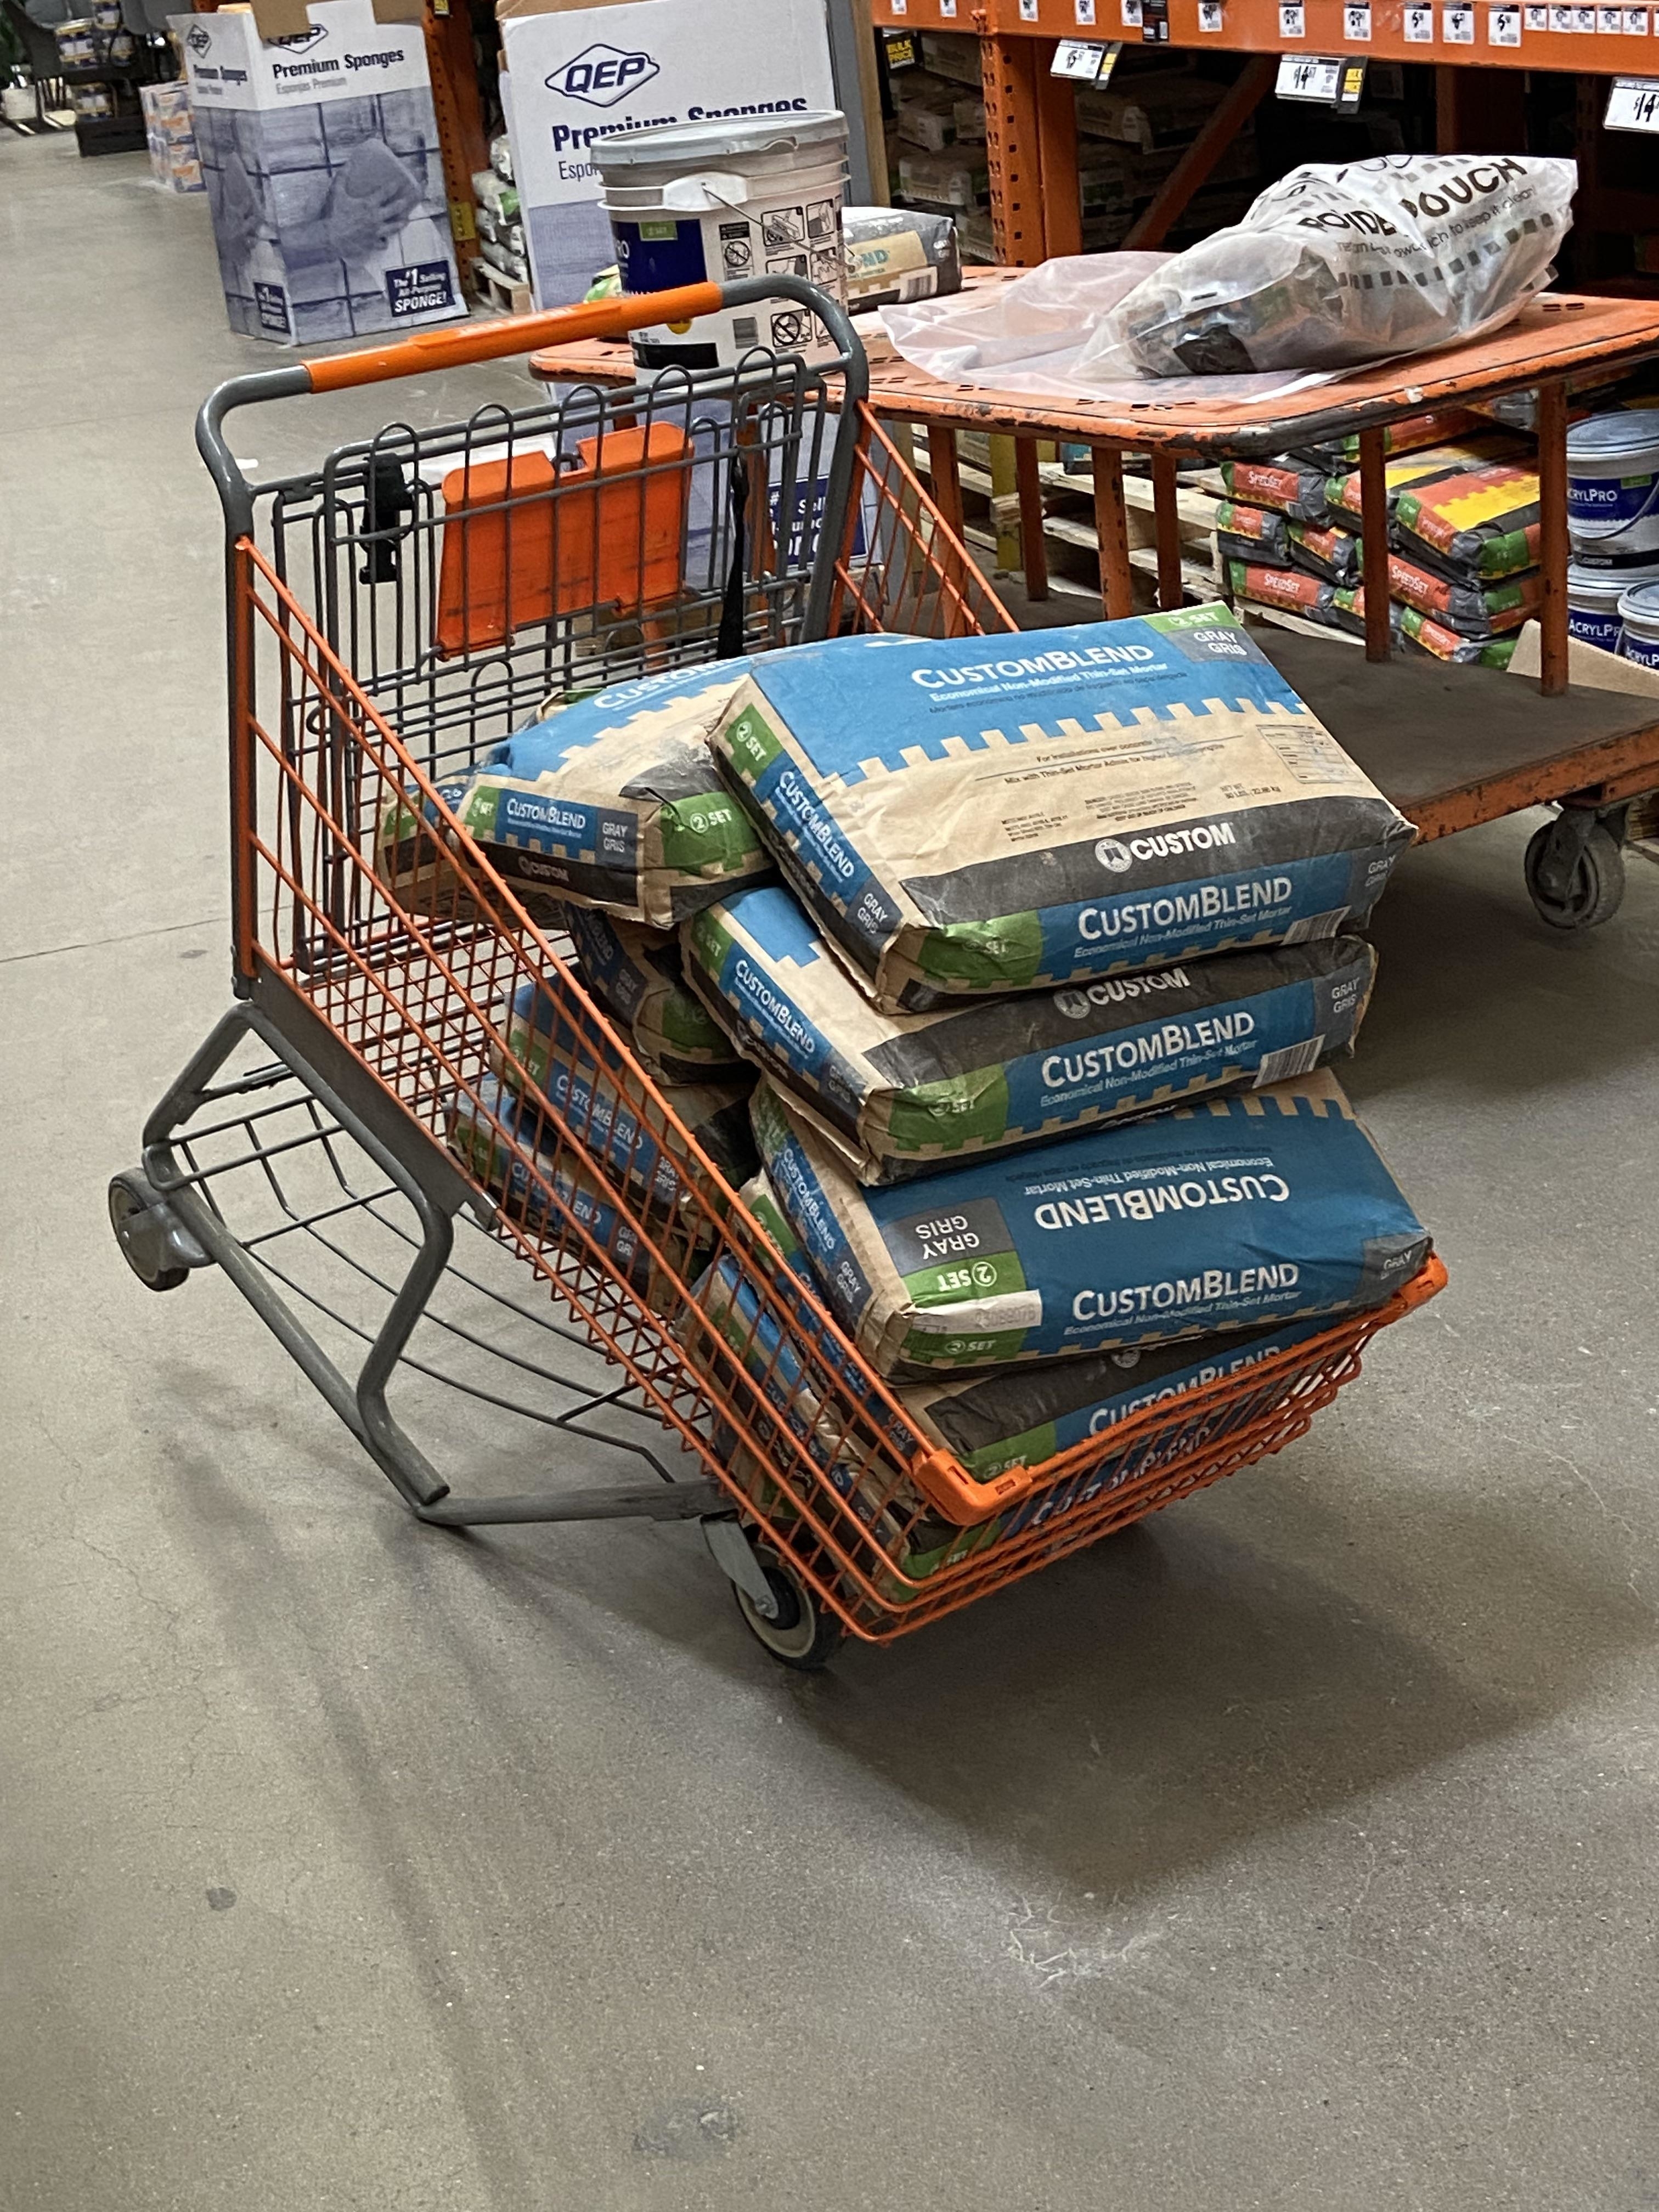 Shopping cart filled with multiple bags of CustomBlend mortar in a hardware store aisle